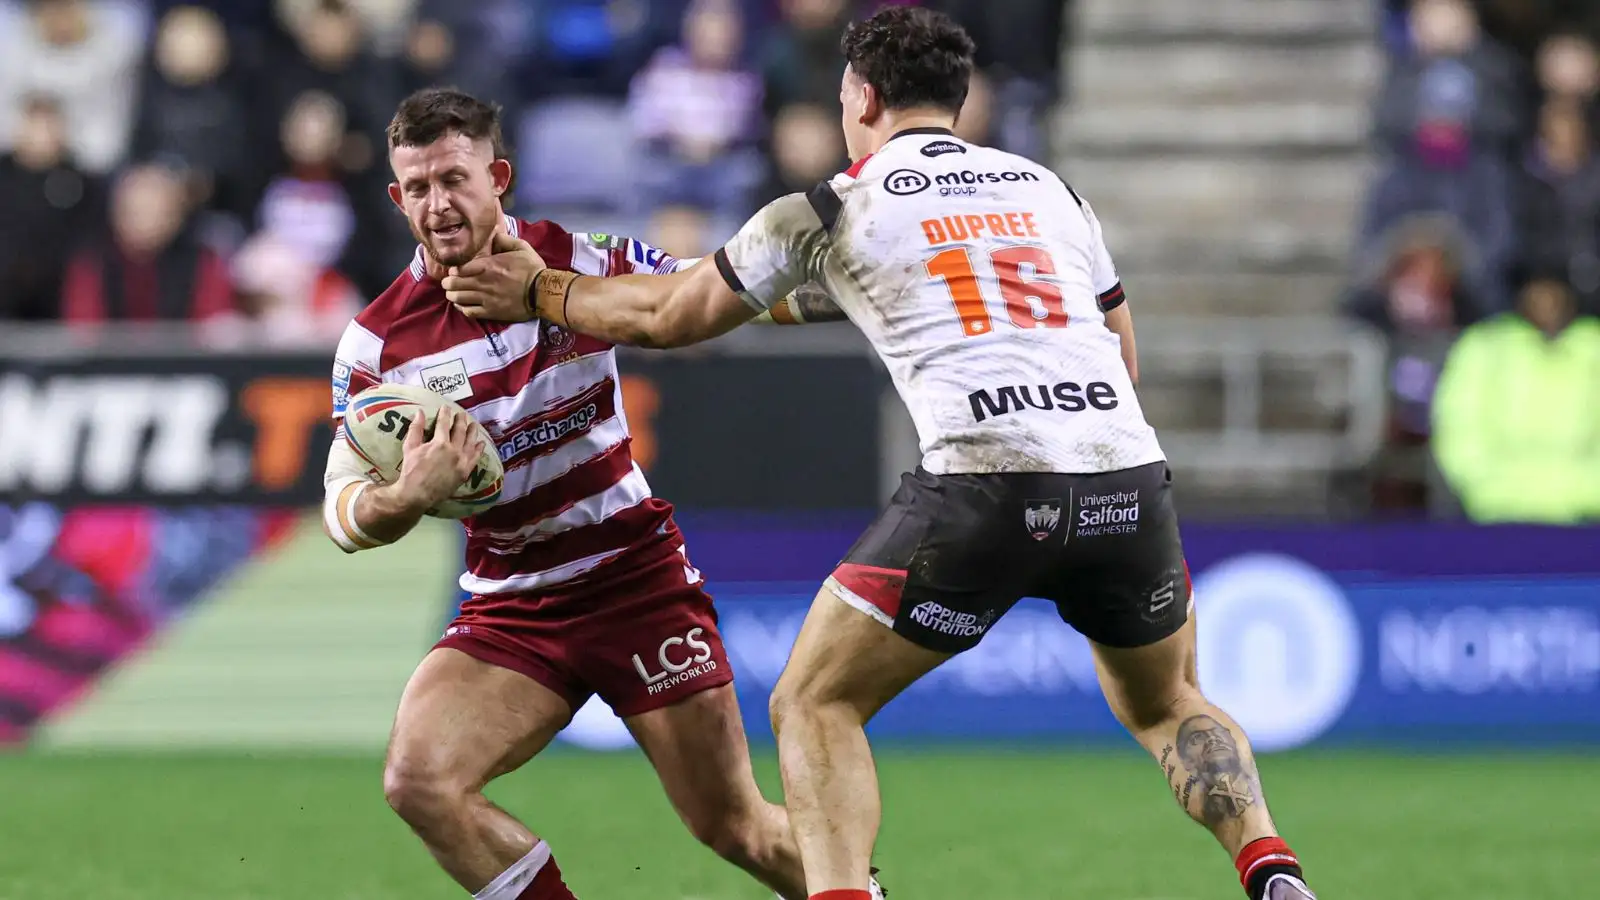 Wigan boss explains positional change that saw Cade Cust benched